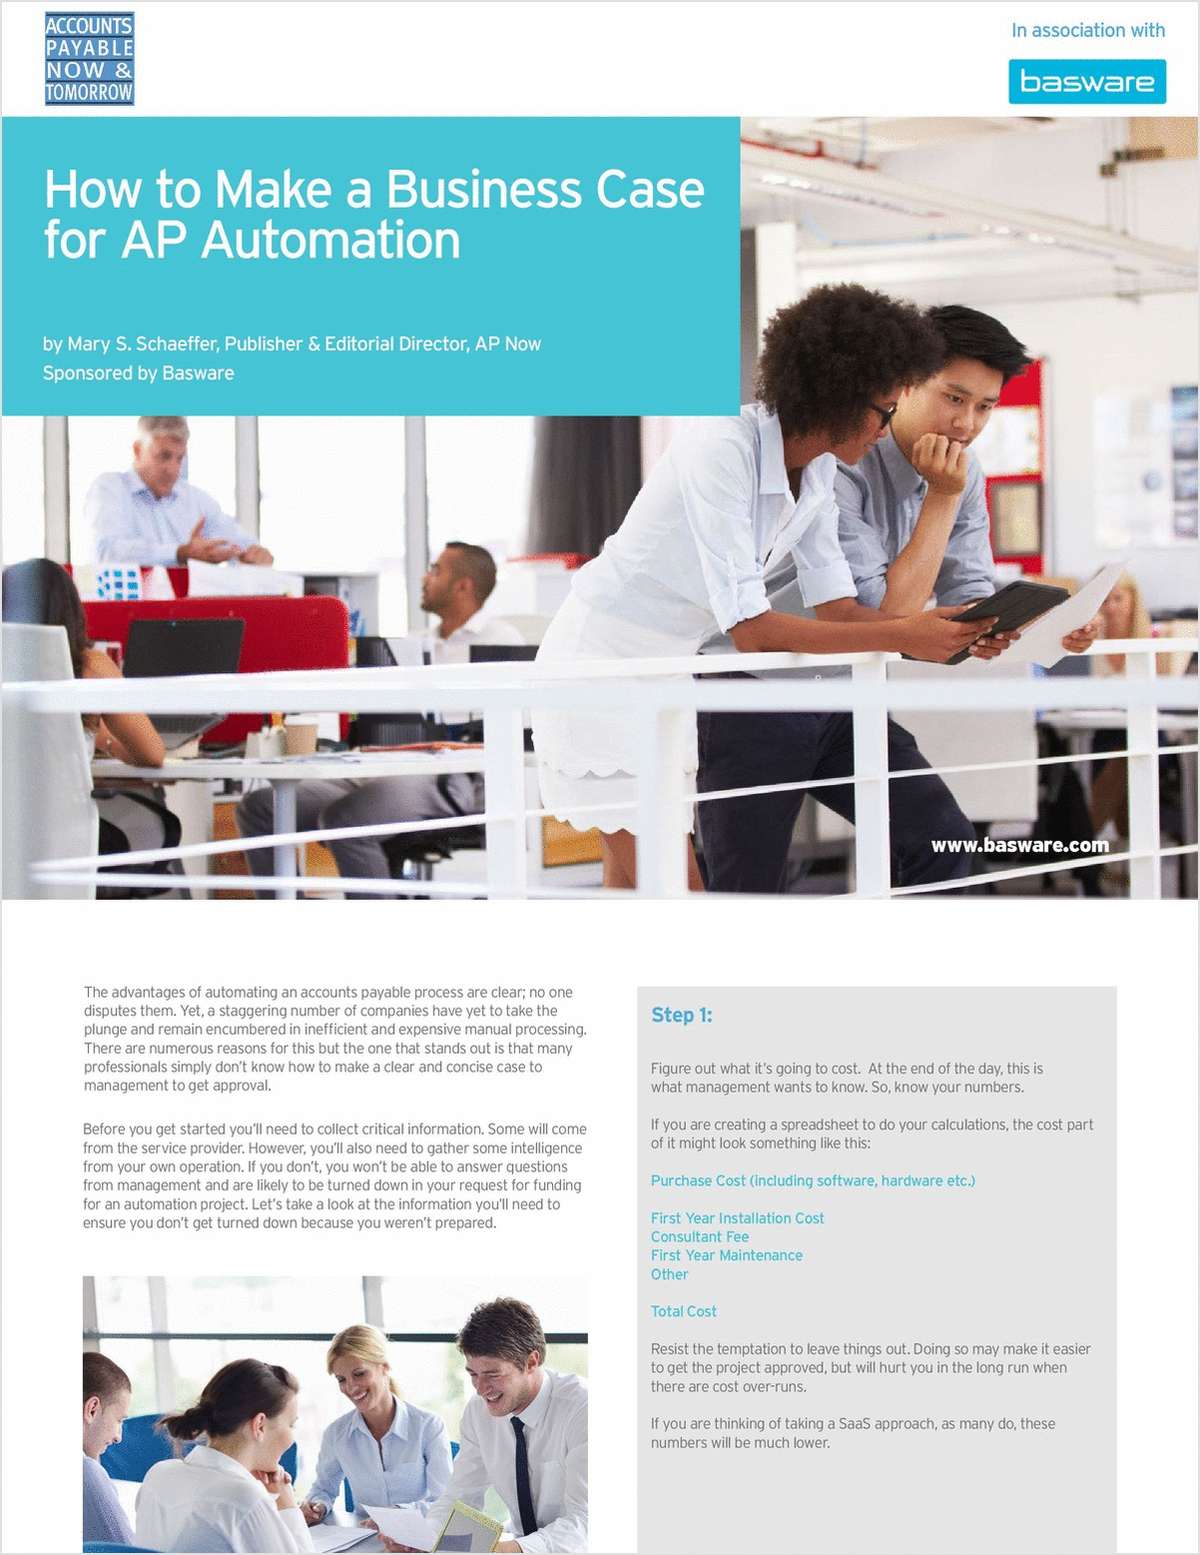 Make the Case for AP Automation